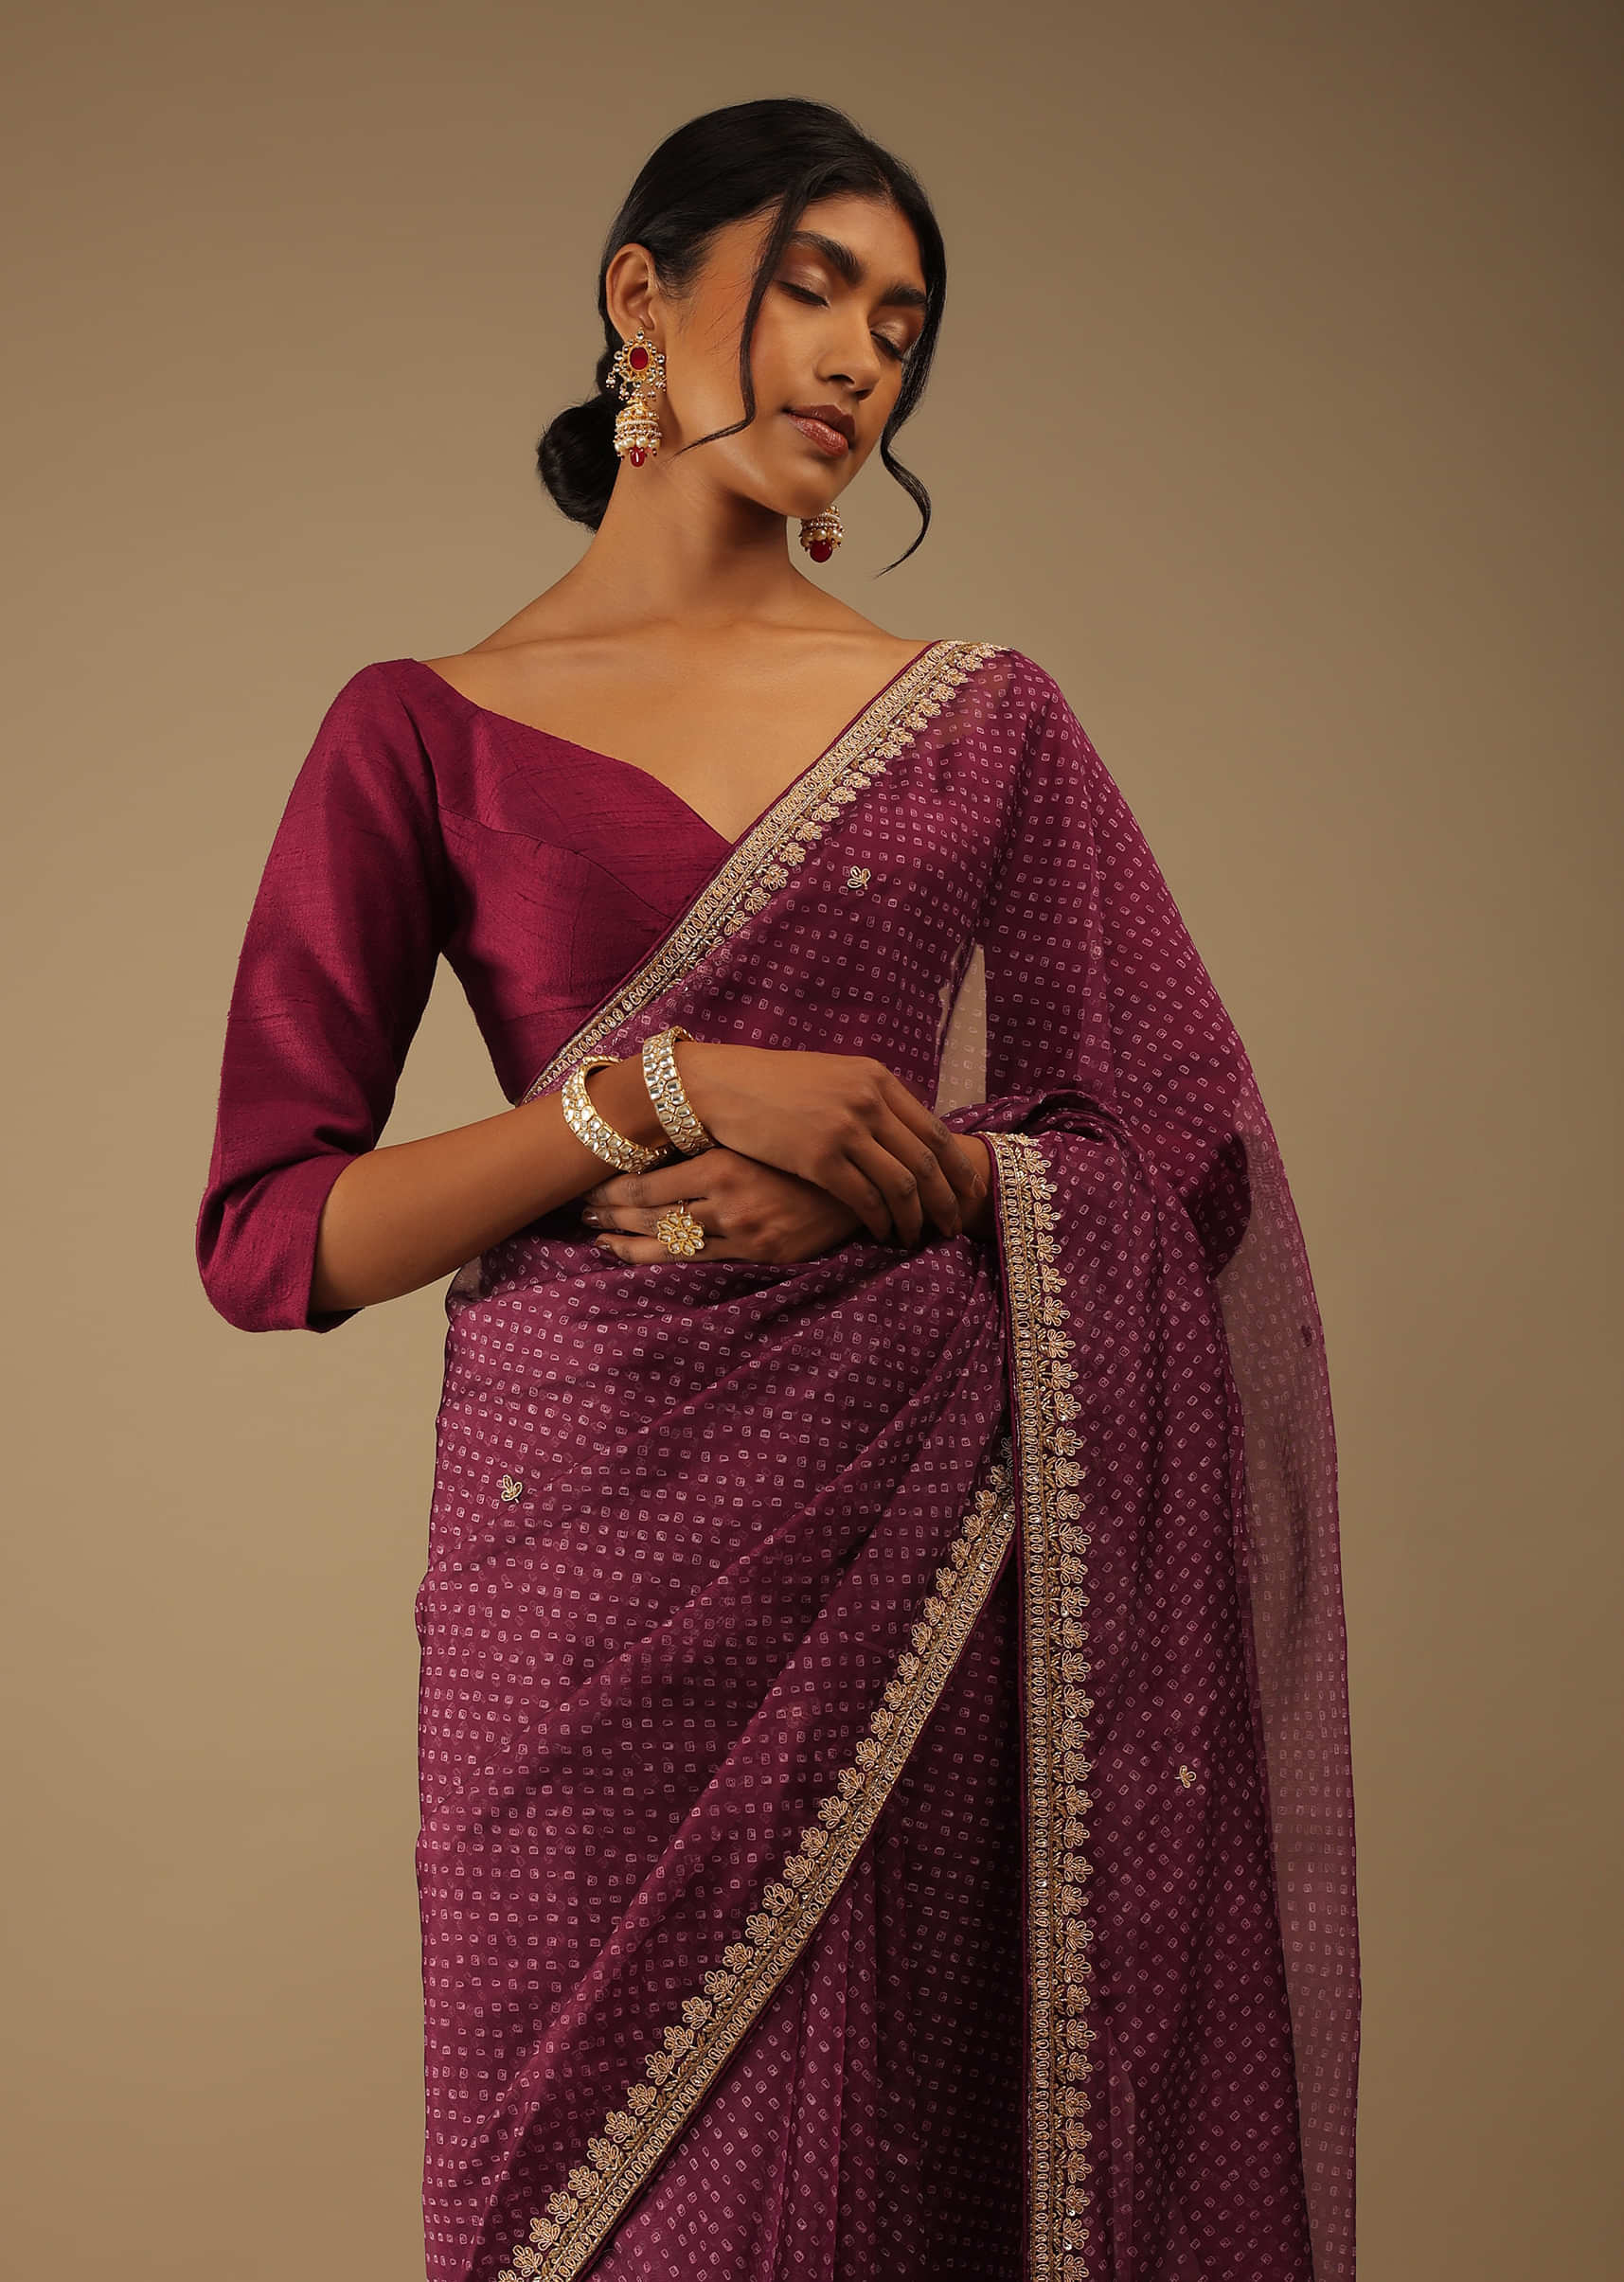 Grape Juice Saree In Digital Bandhani Print, Crafted In Organza In Sequins And Cut Dana Floral Butti Embroidery, Crafted In Organza With Cut Dana Floral Embroidery Buttis